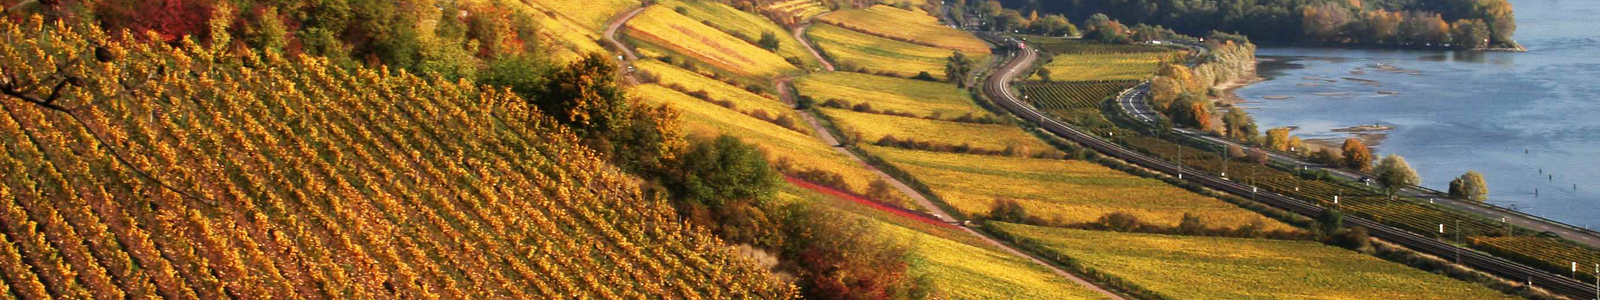 View over vineyards to the Rhine ©DLR